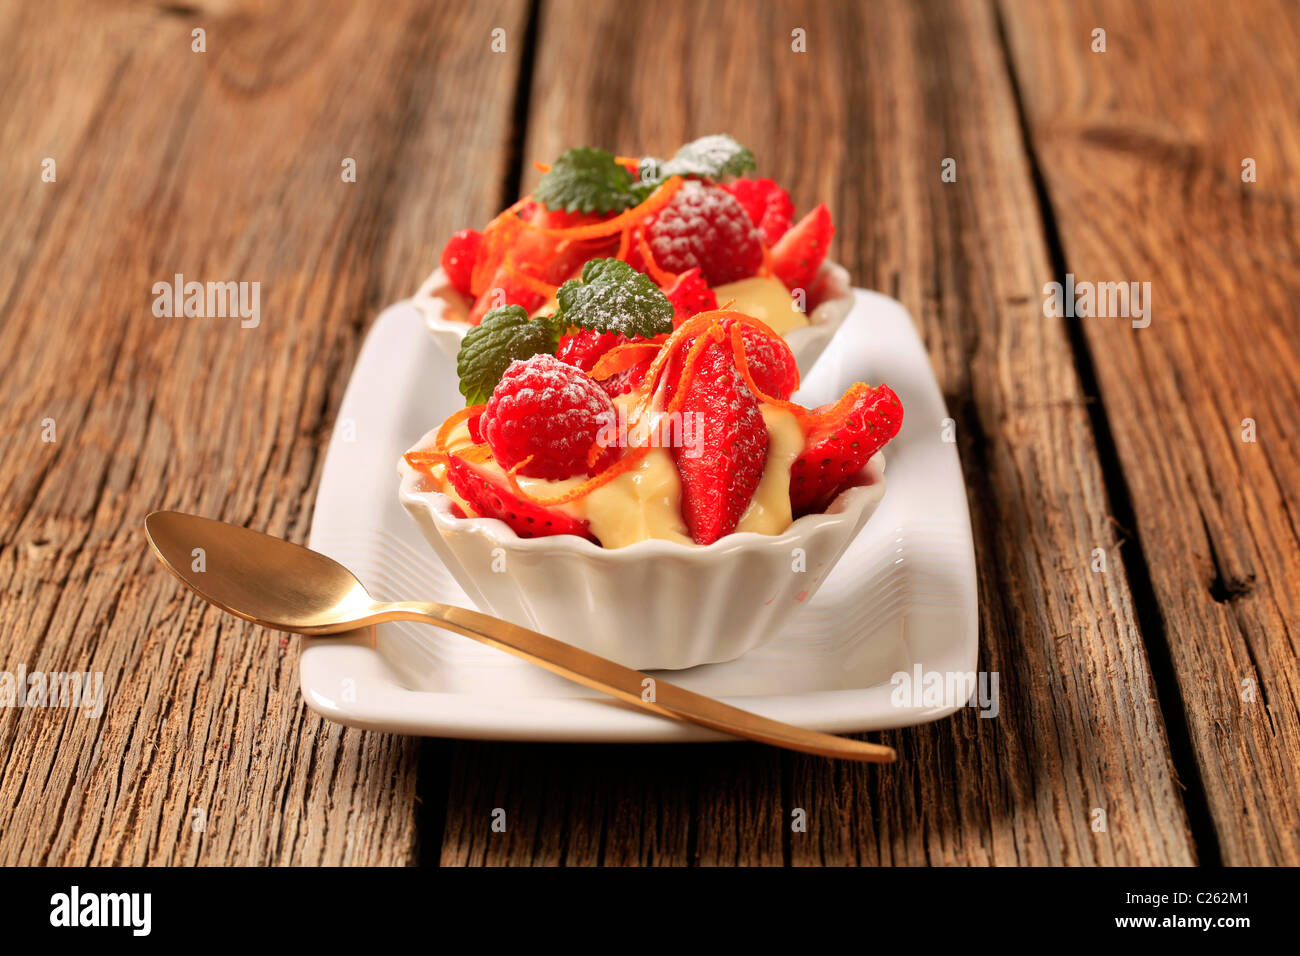 Creamy pudding and fresh fruit in small dessert dishes Stock Photo